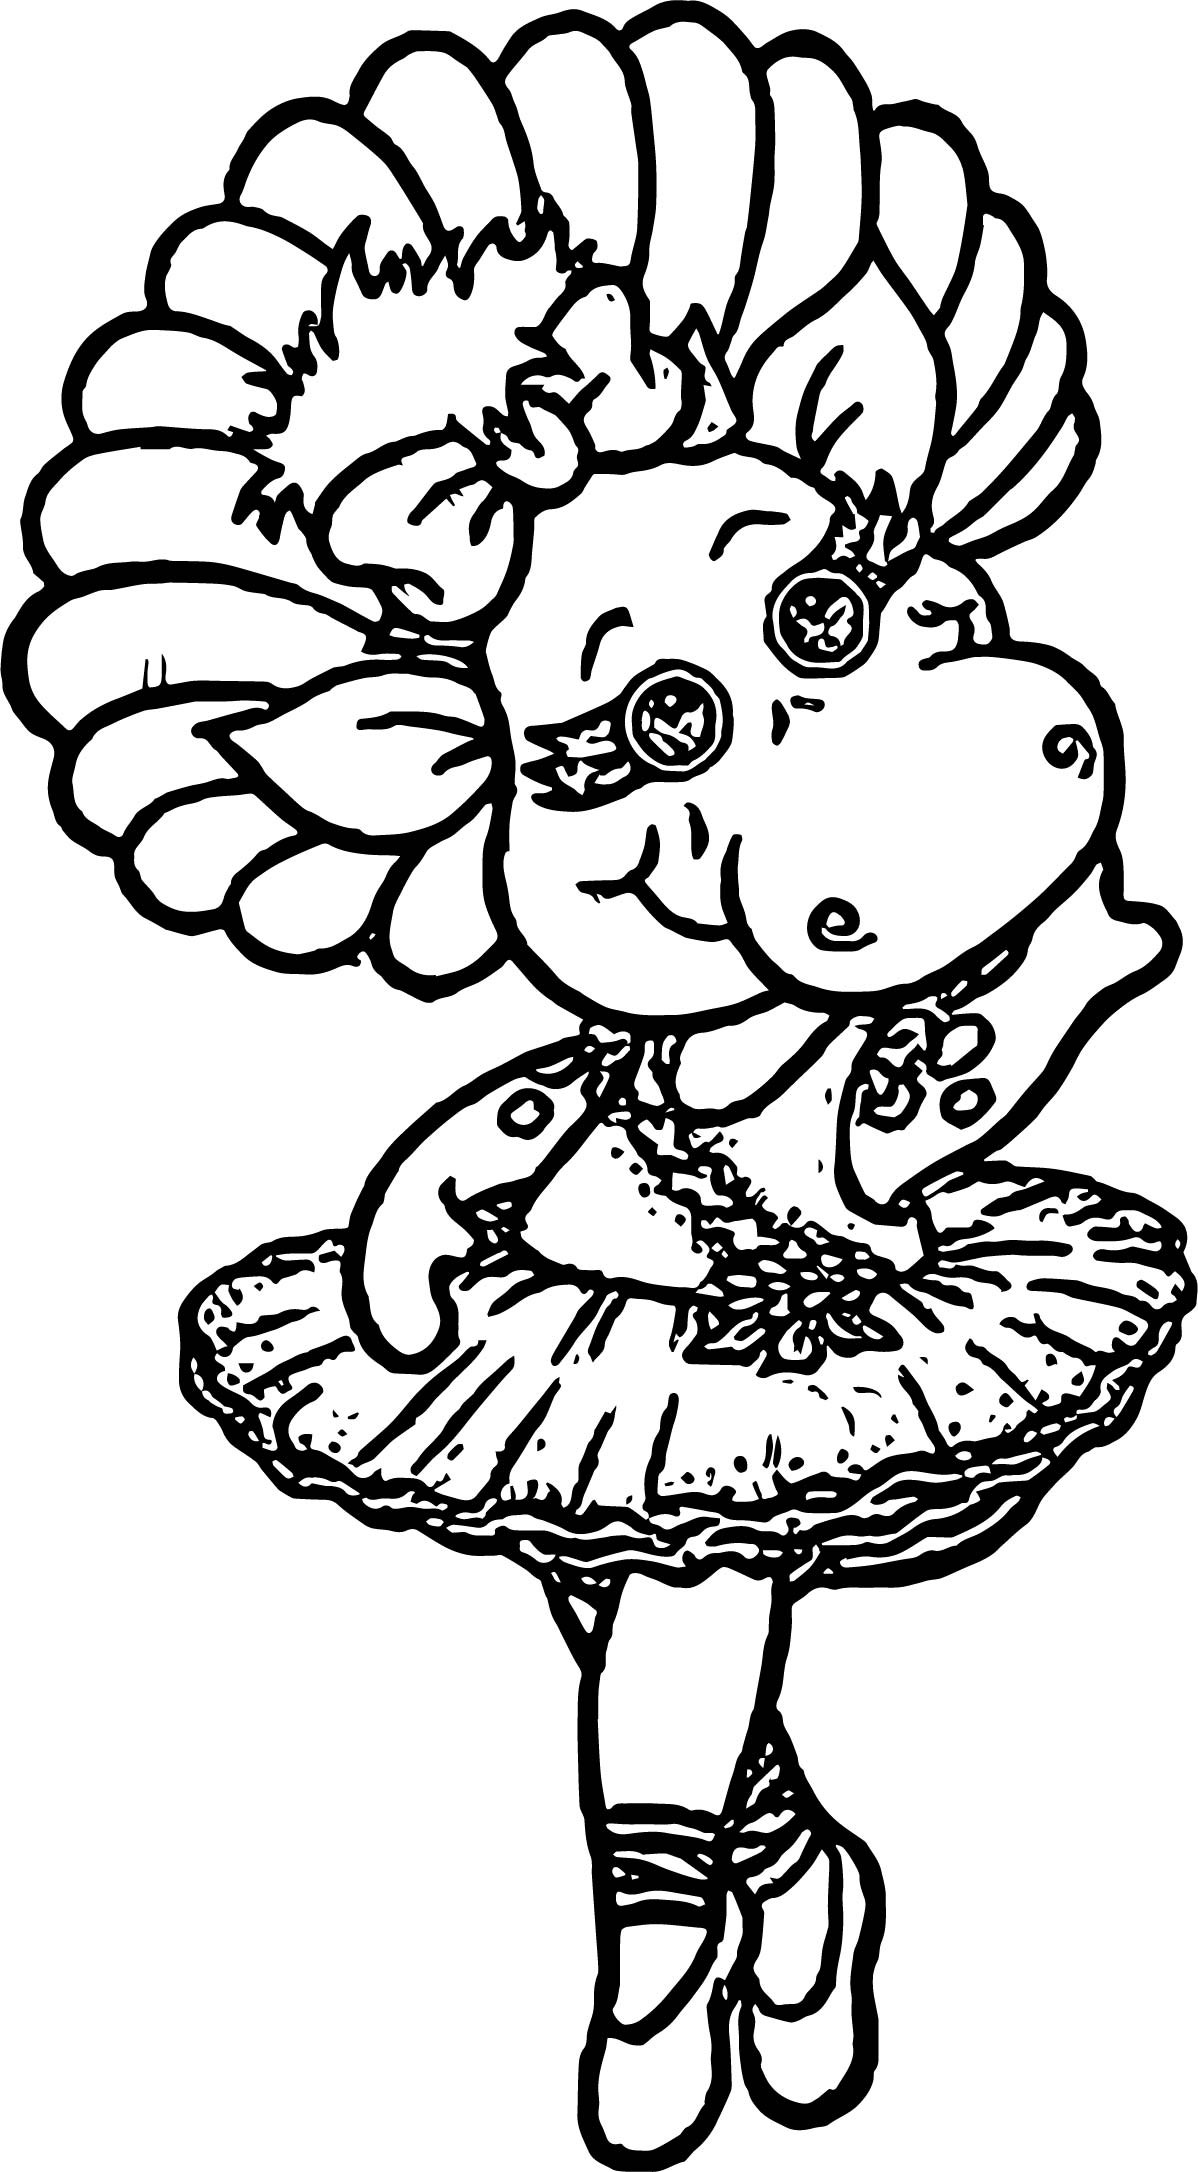 Baby Bop Coloring Pages
 Baby Bop Dance Coloring Page